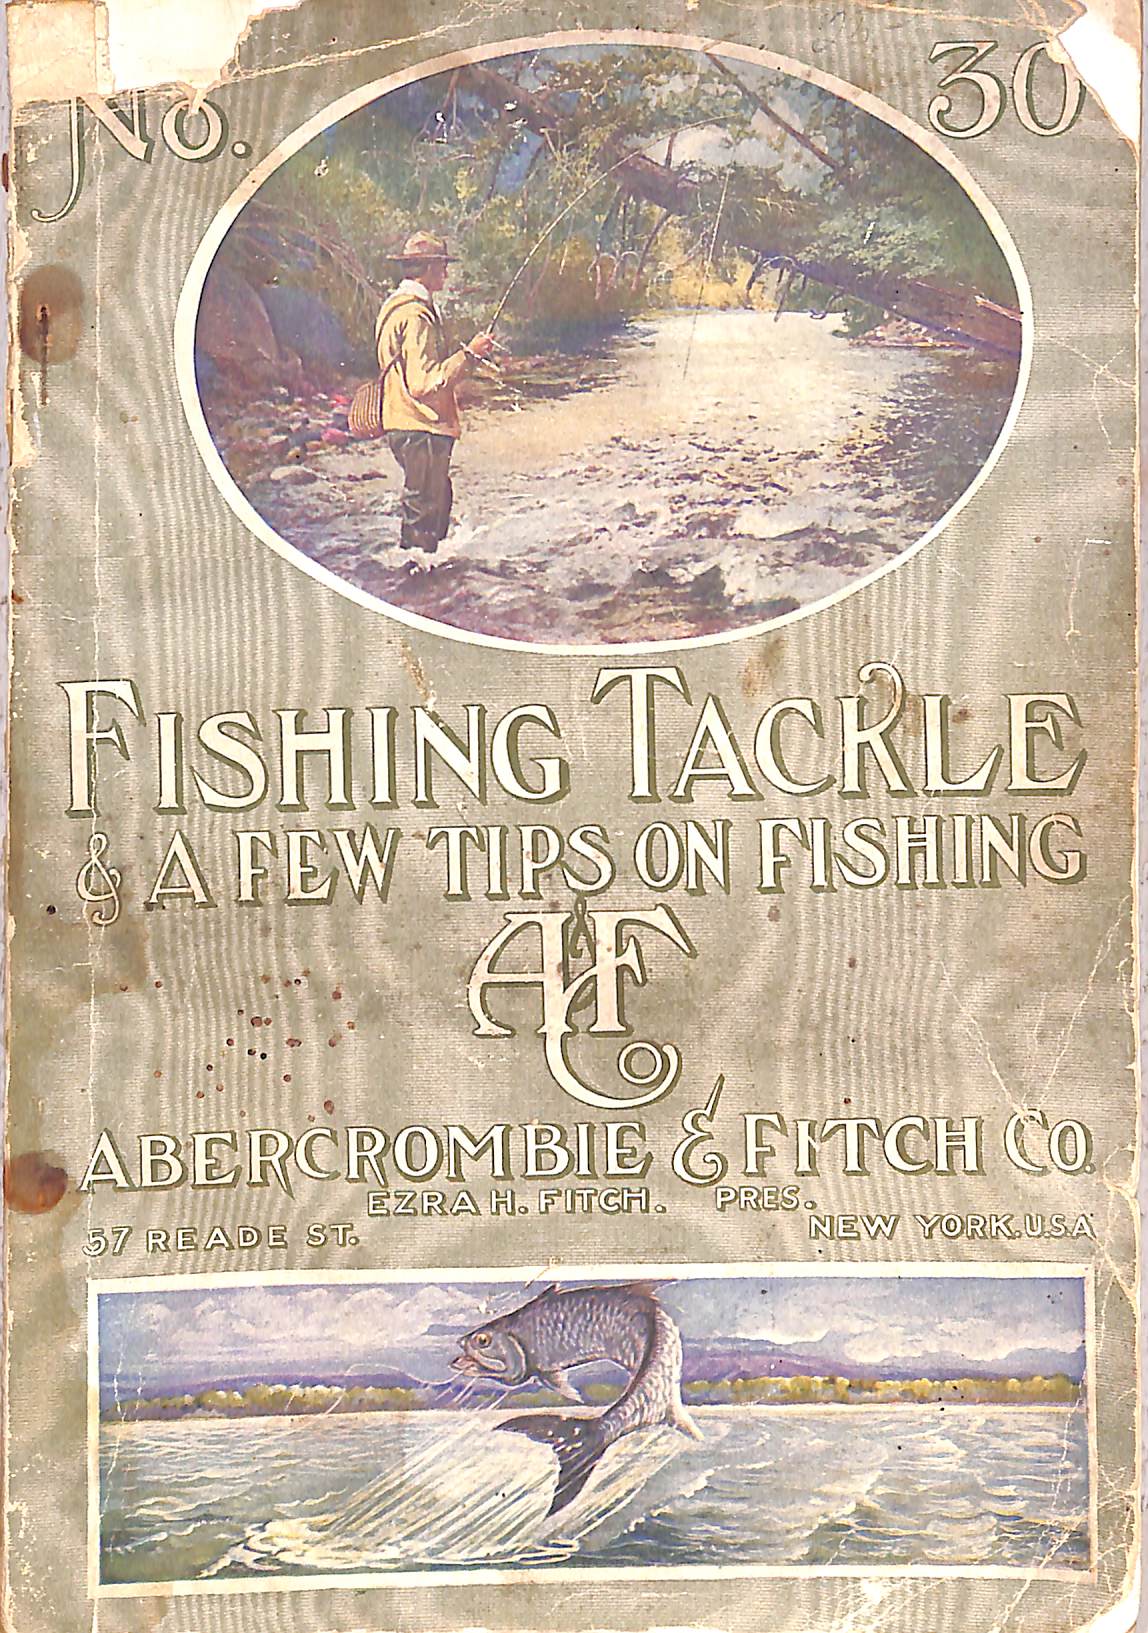 Abercrombie & Fitch Fishing Tackle 1911 Catalog